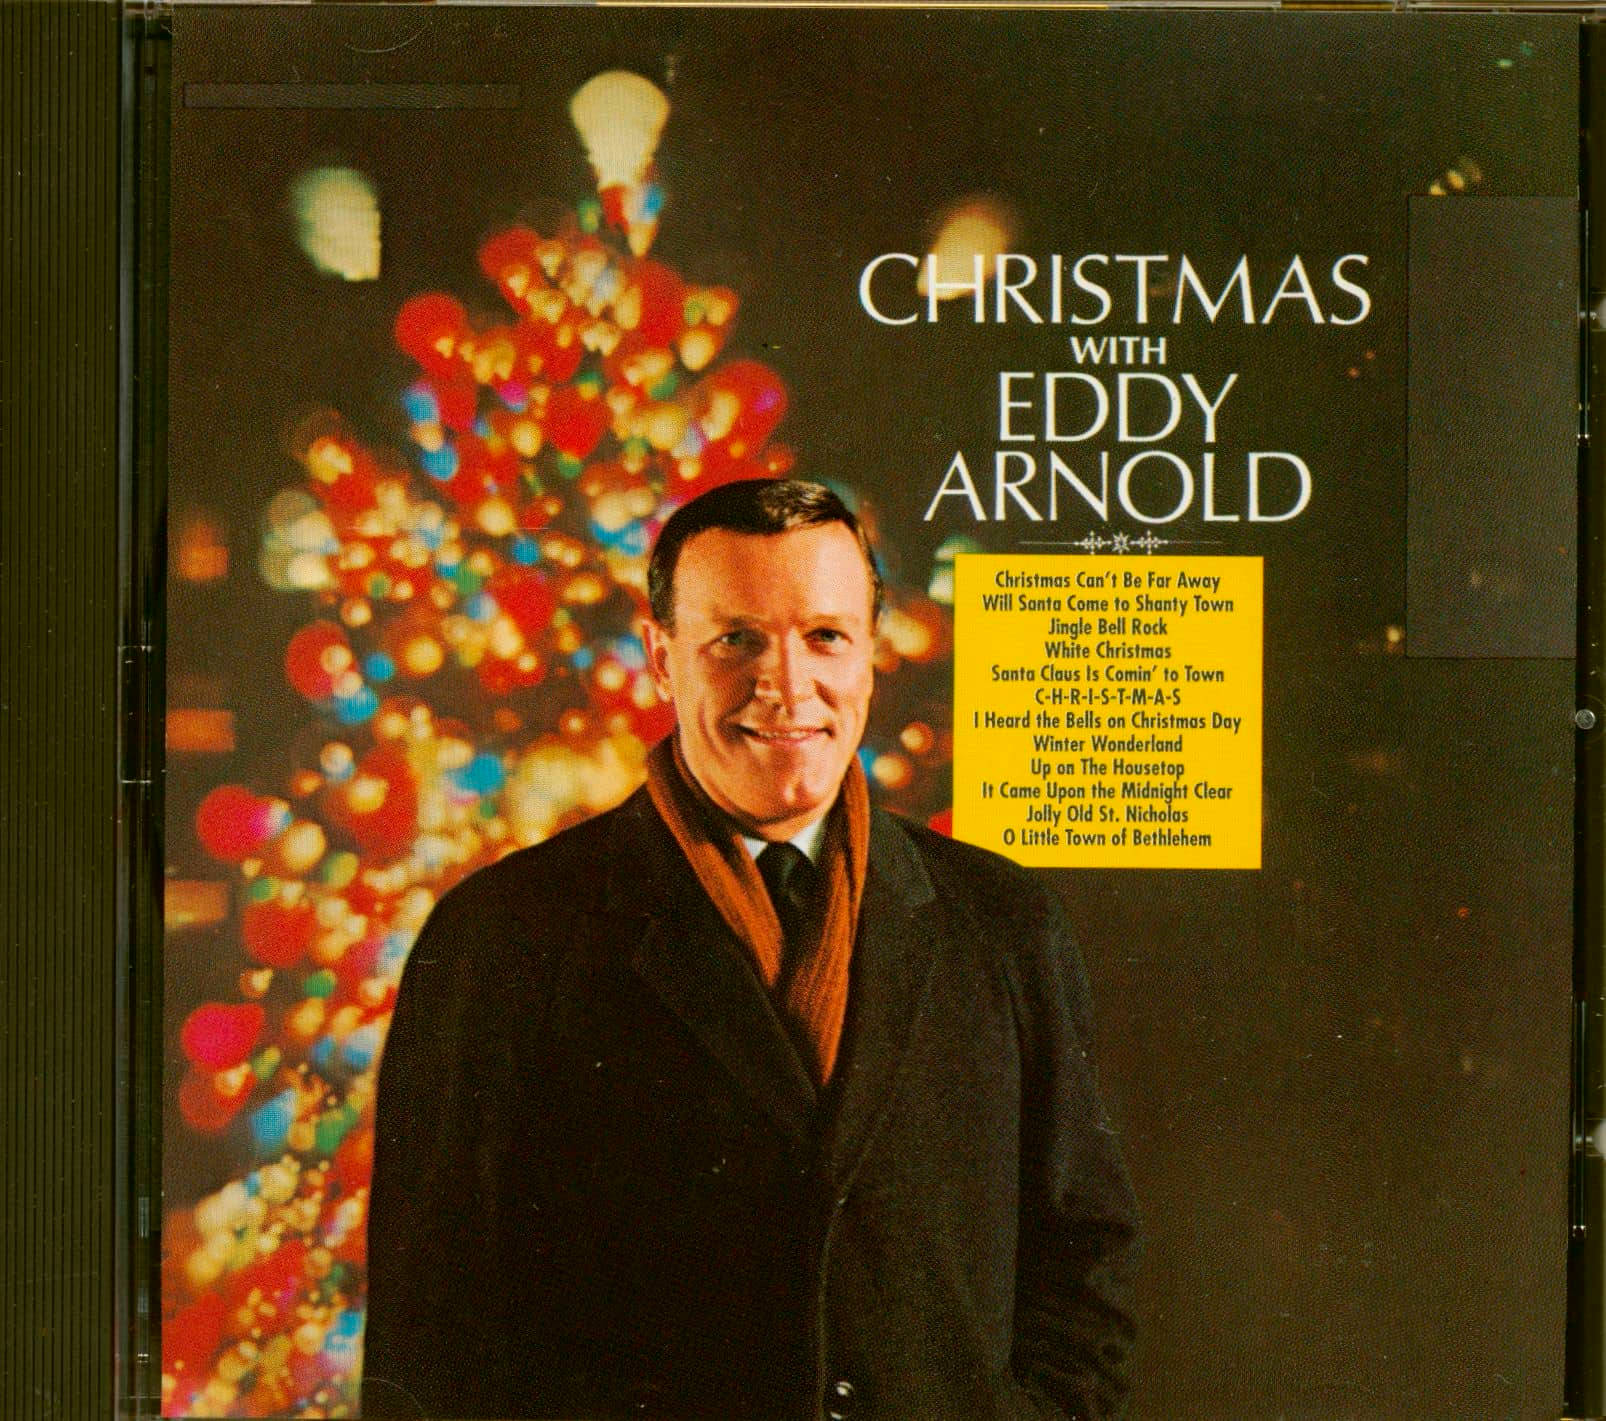 Christmas With Eddy Arnold 1967 Cd Cover Wallpaper